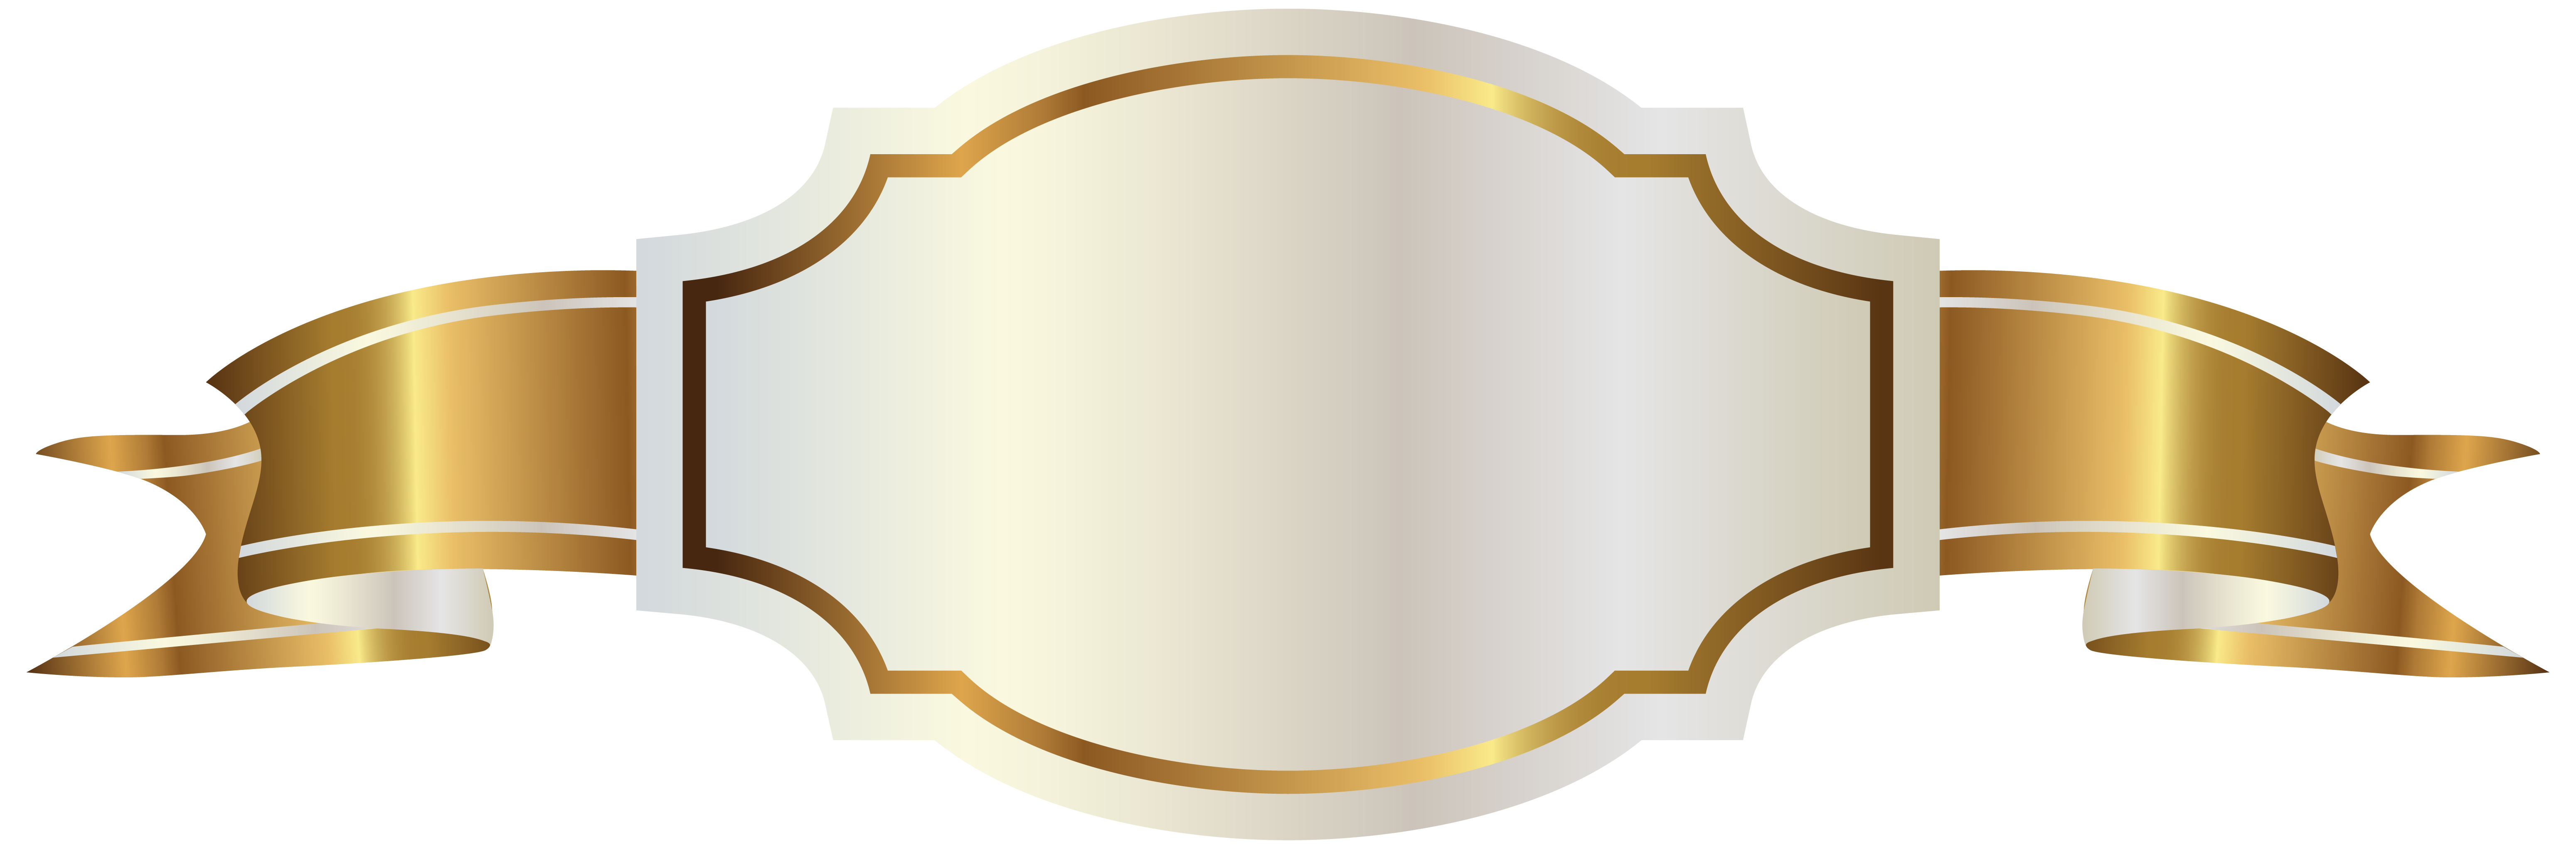 free-gold-banner-cliparts-download-free-gold-banner-cliparts-png-images-free-cliparts-on